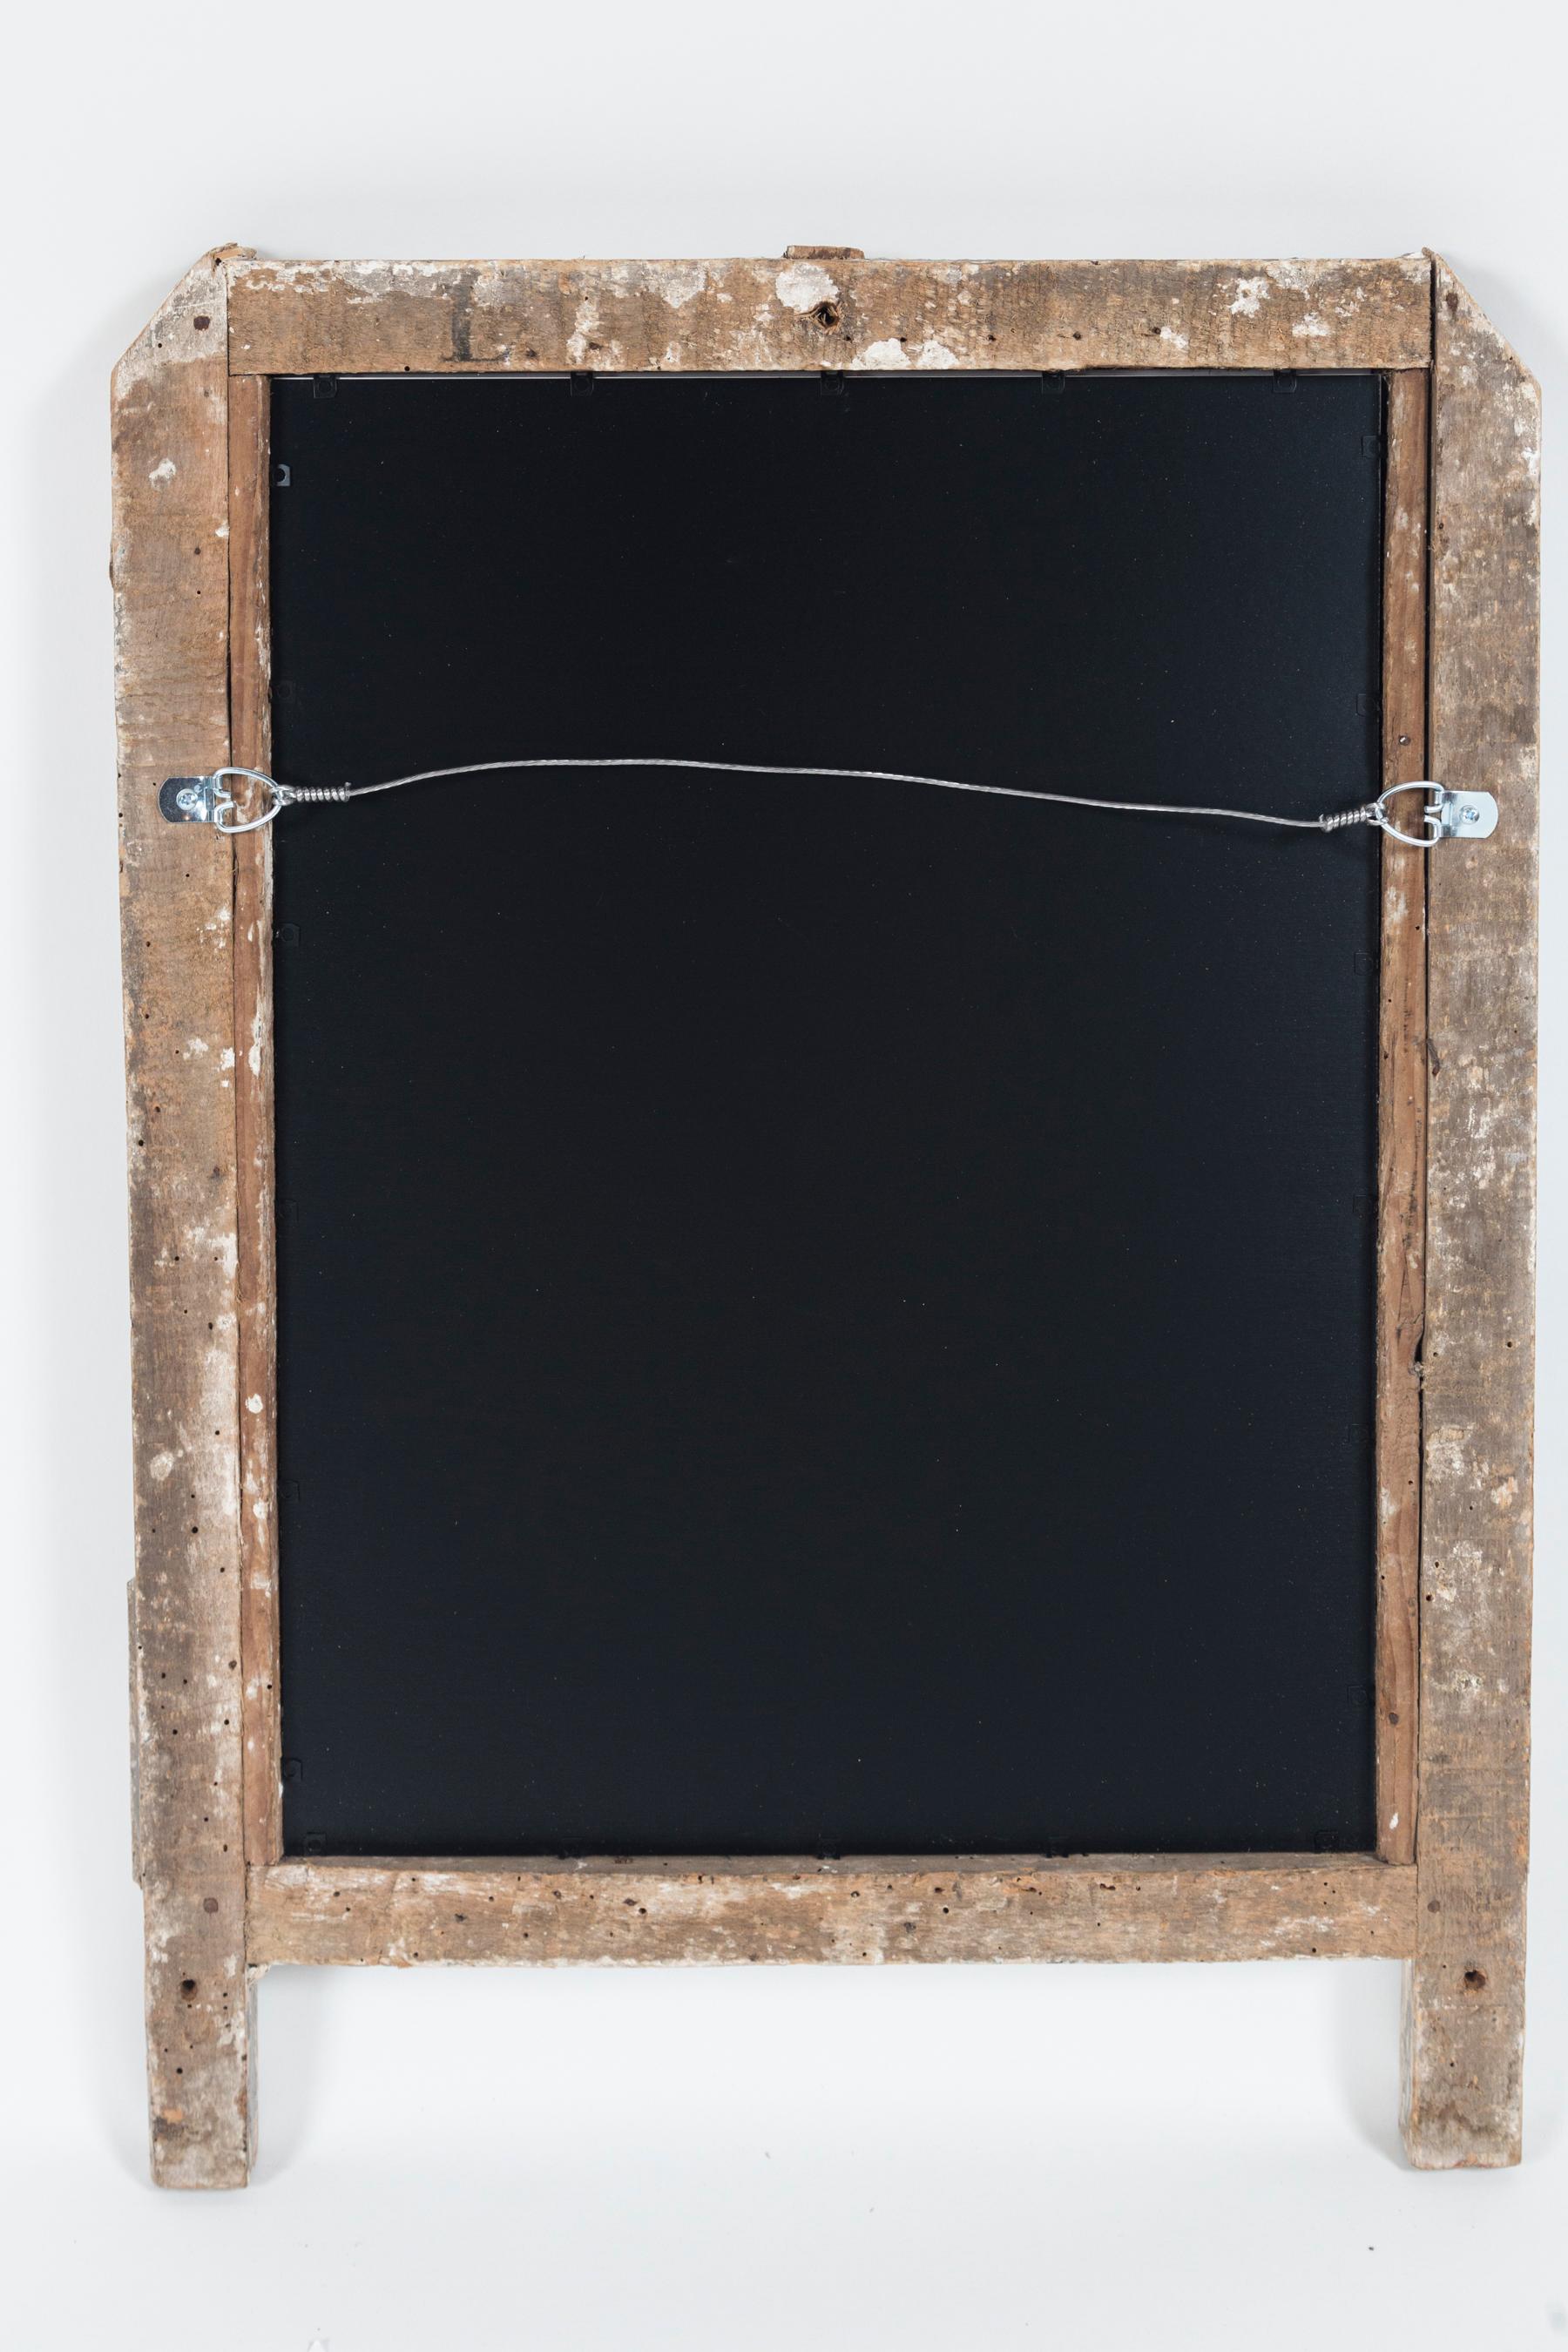 Antique Italian Giltwood Mirror Frame, late 18th Century For Sale 2